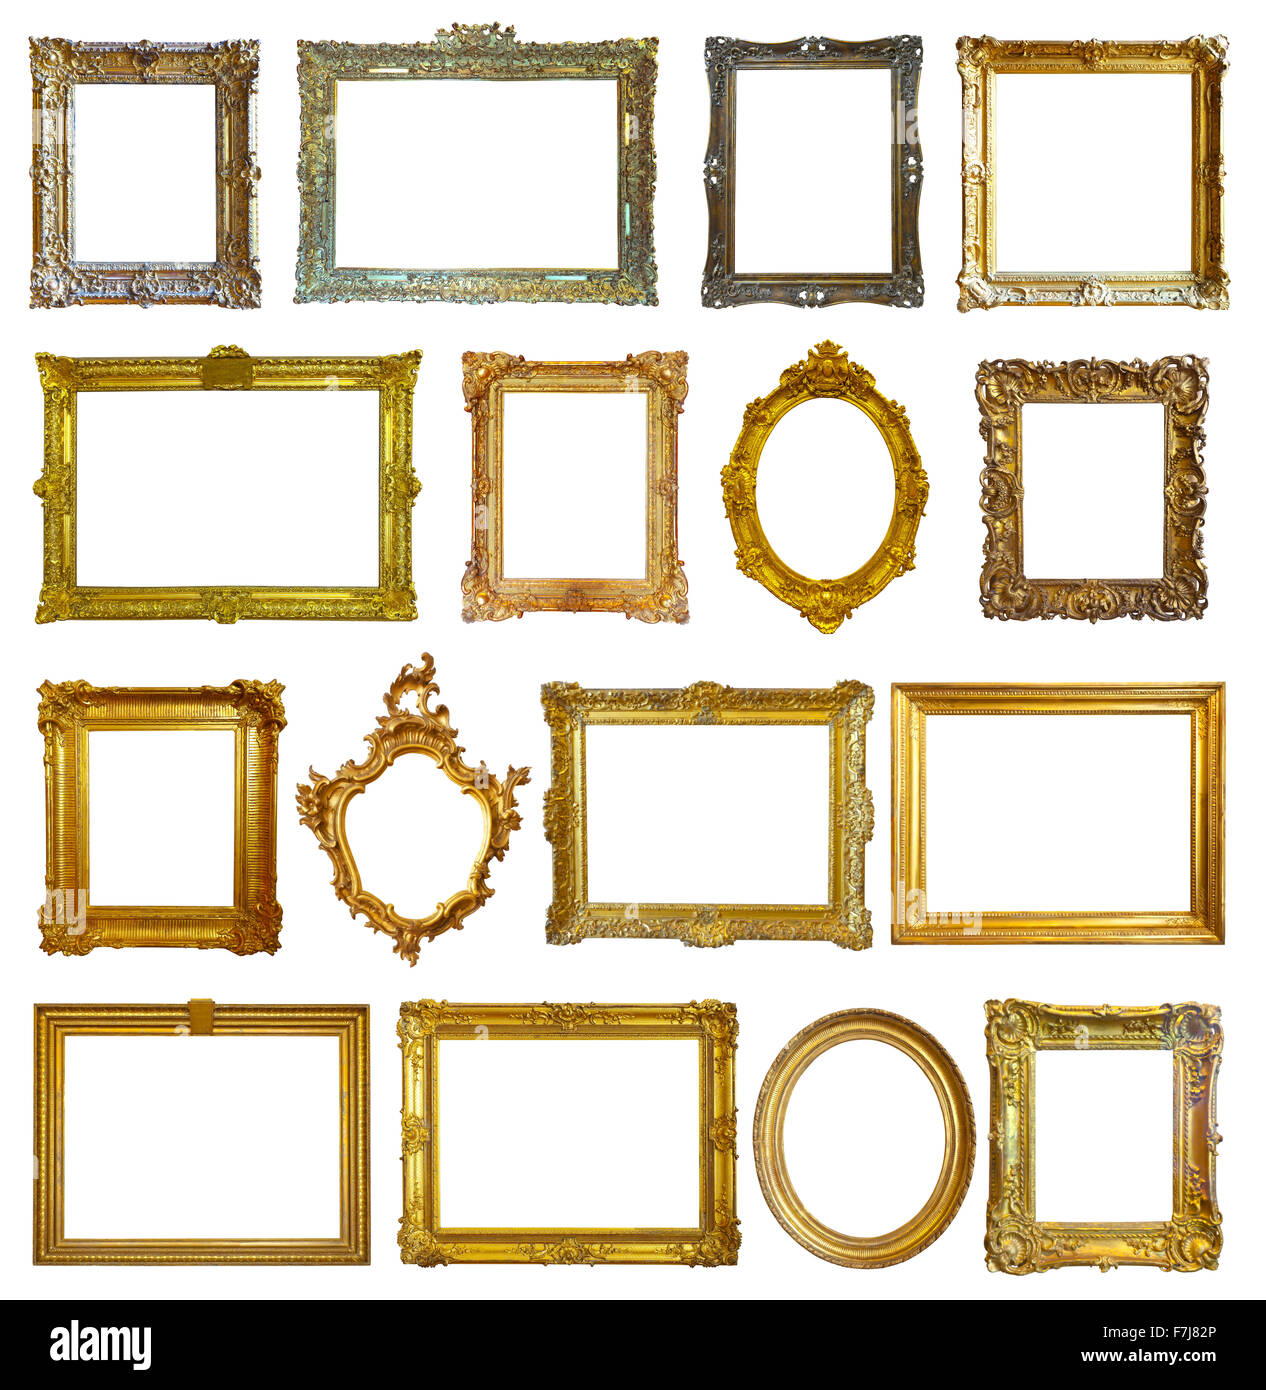 Set of 16 picture frames. Isolated over white background with clipping path Stock Photo